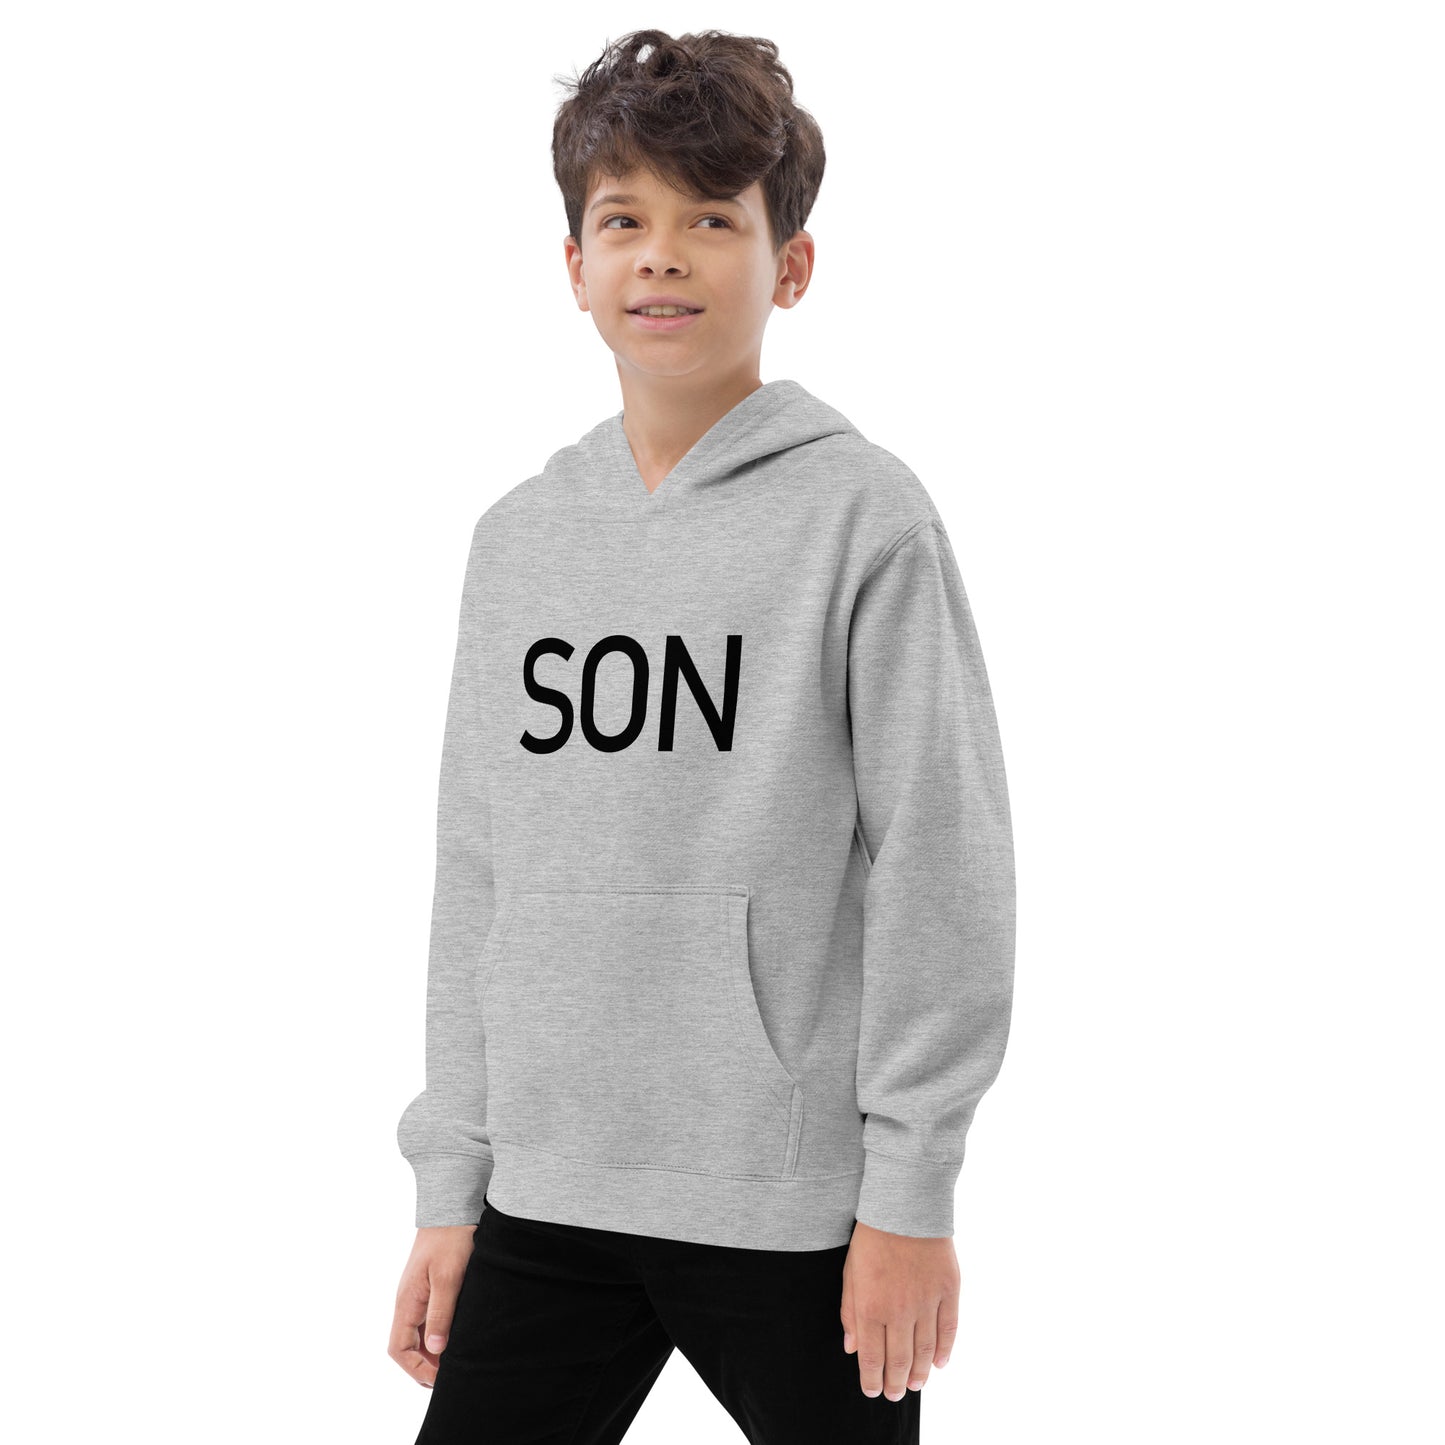 Son - Sustainably Made Kids Hoodie